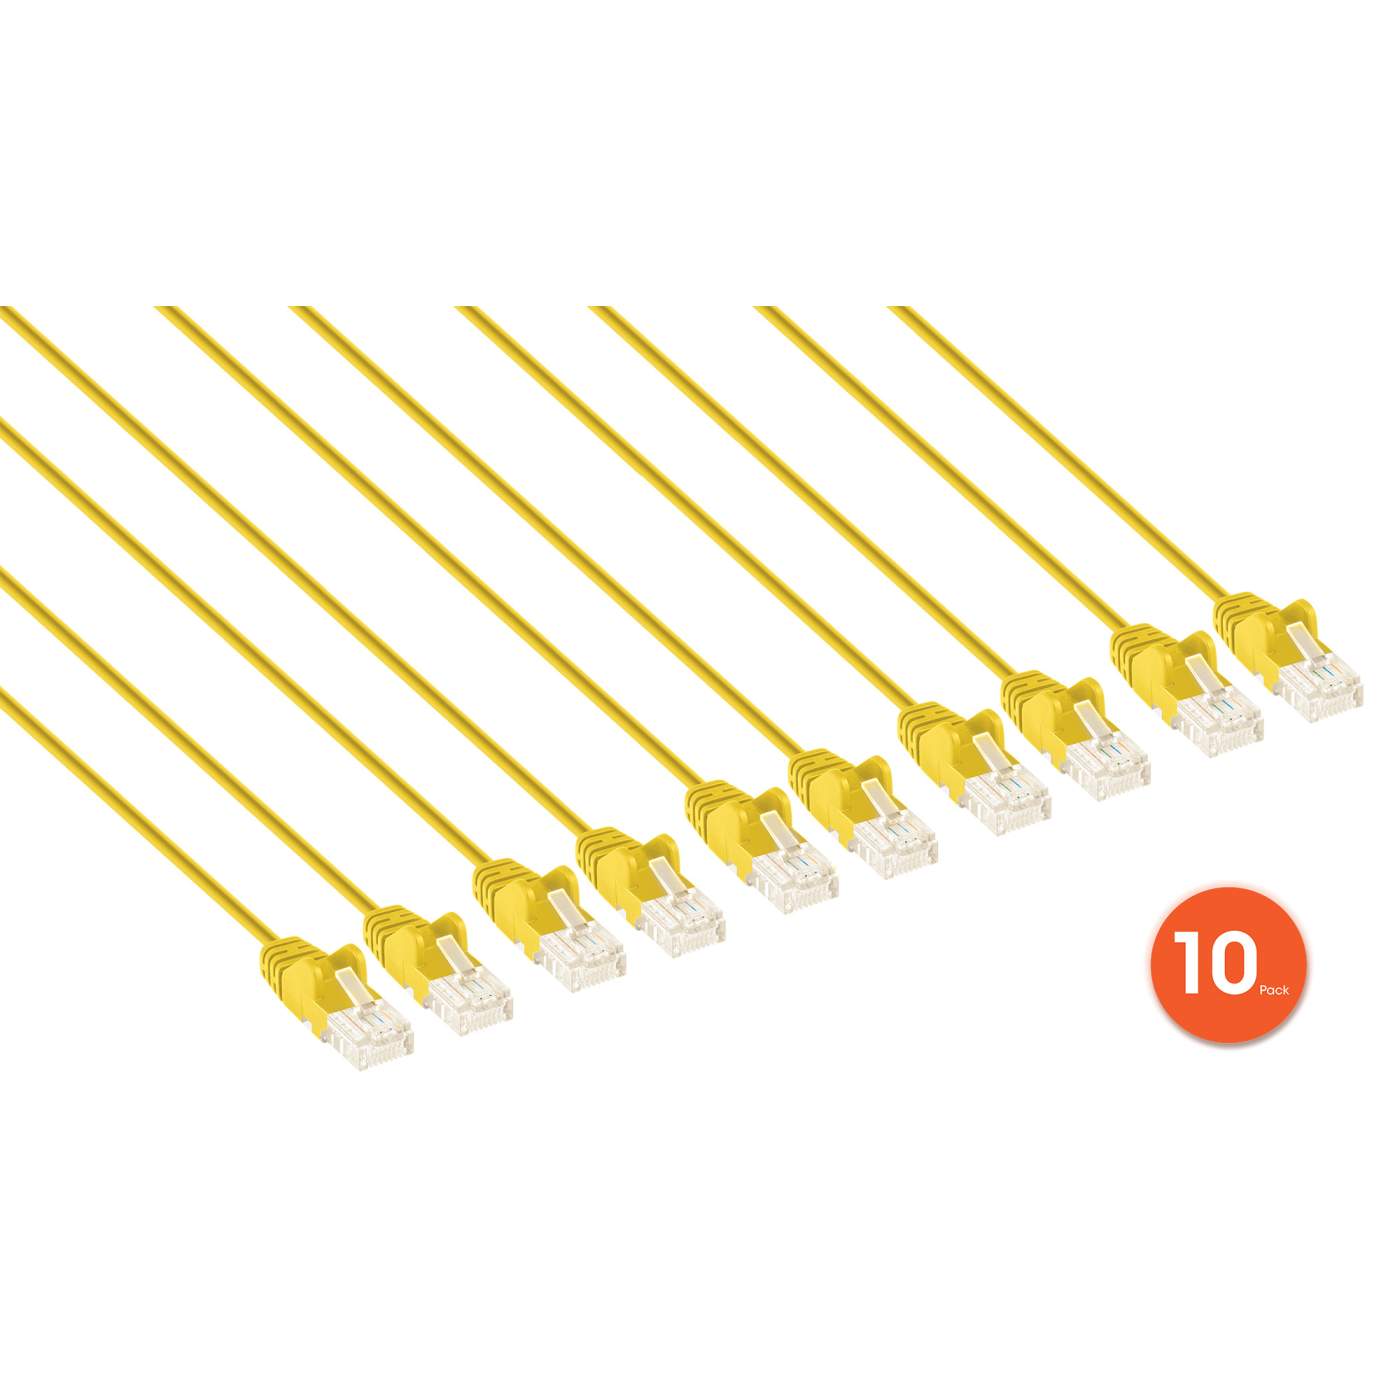 Cat6 U/UTP Slim Network Patch Cable, 7 ft., Yellow, 10-Pack Image 2